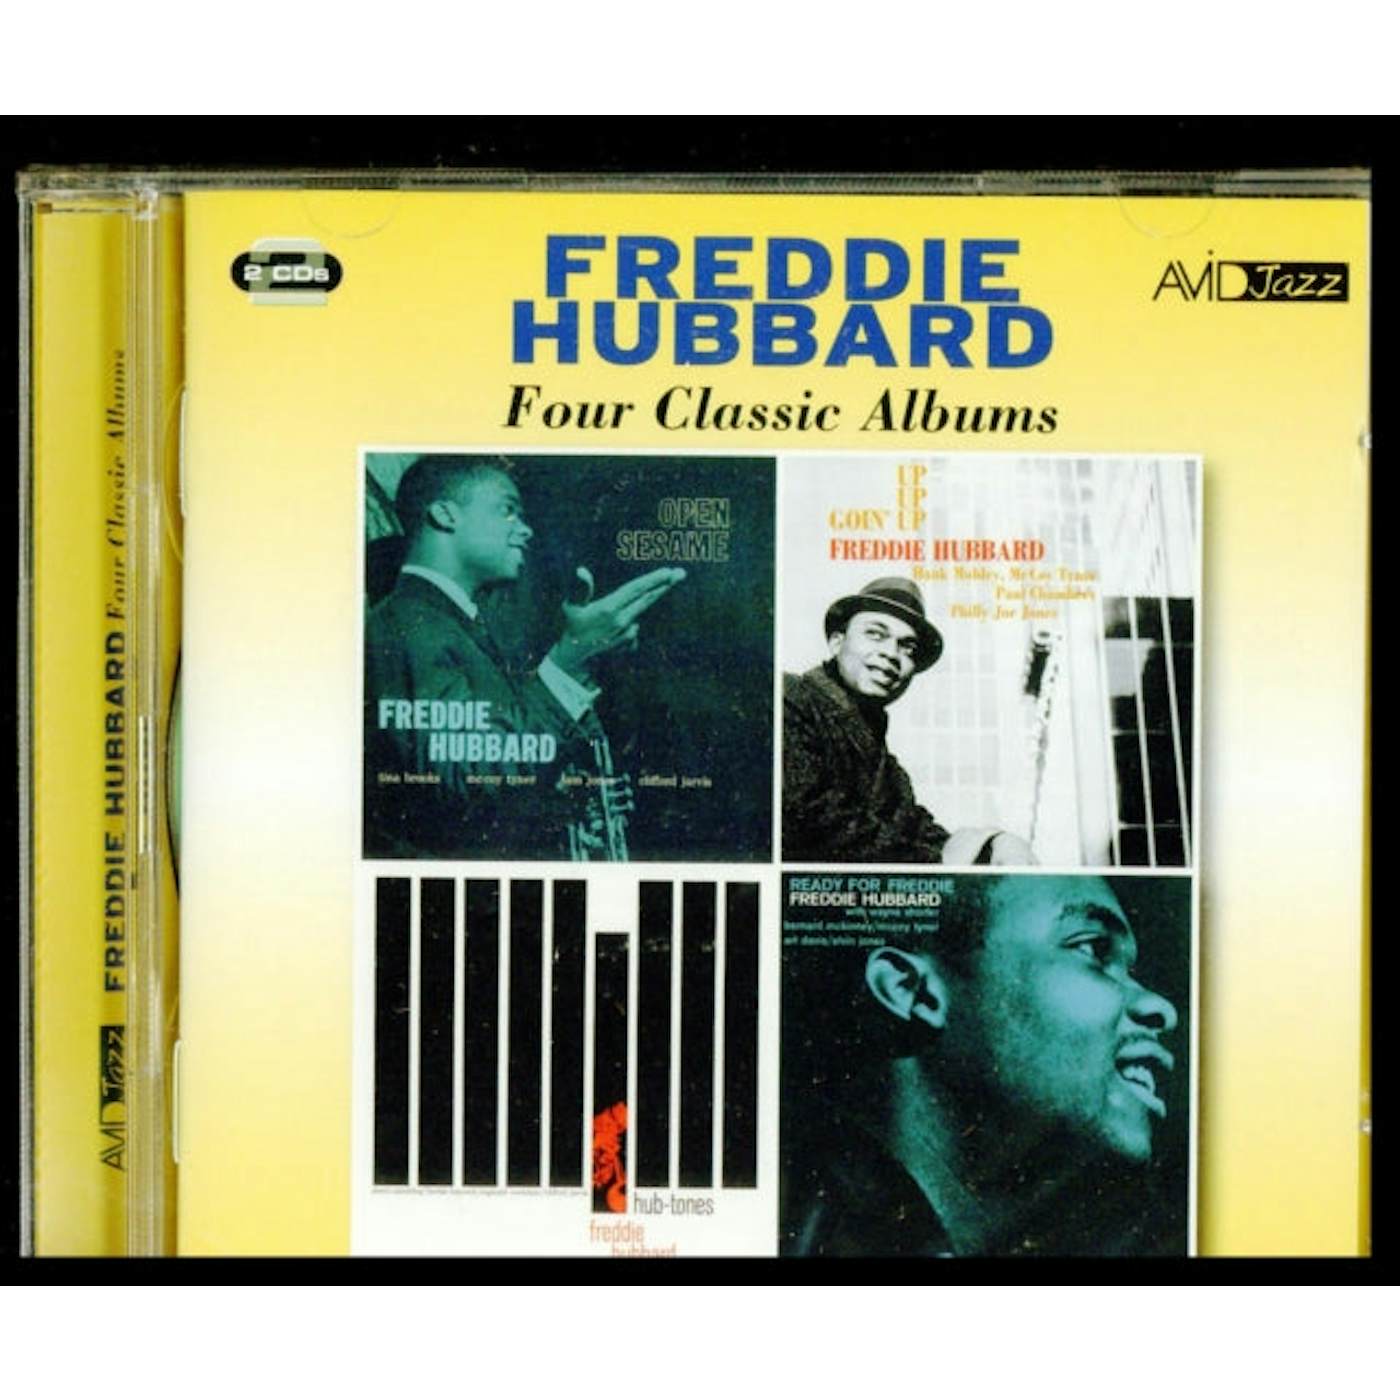 Freddie Hubbard CD - Four Classic Albums (Open Sesame / Goin' Up / Hub-Tones / Ready For Freddie)